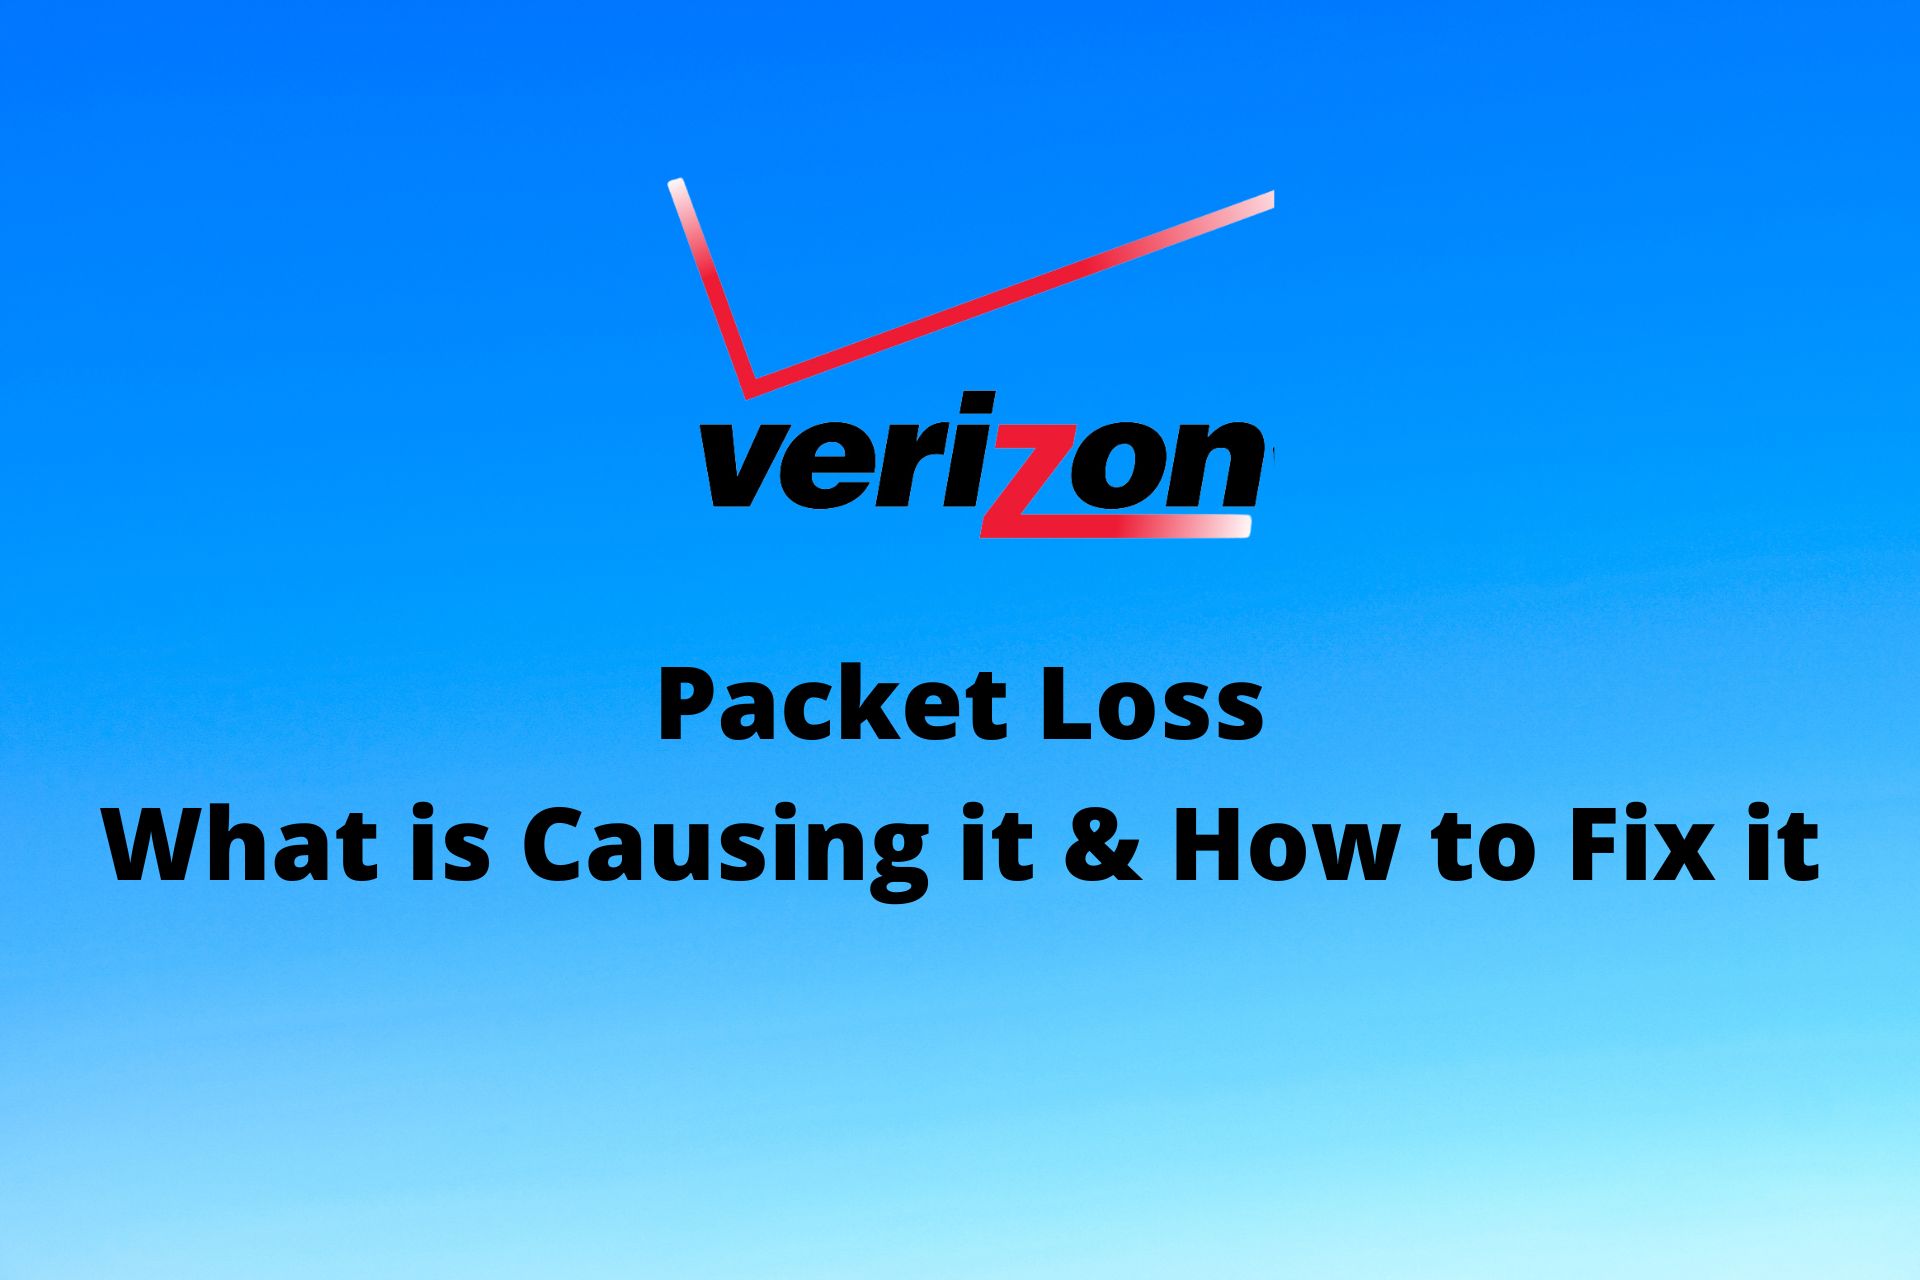 Verizon Packet Loss: What is Causing It & How to Fix